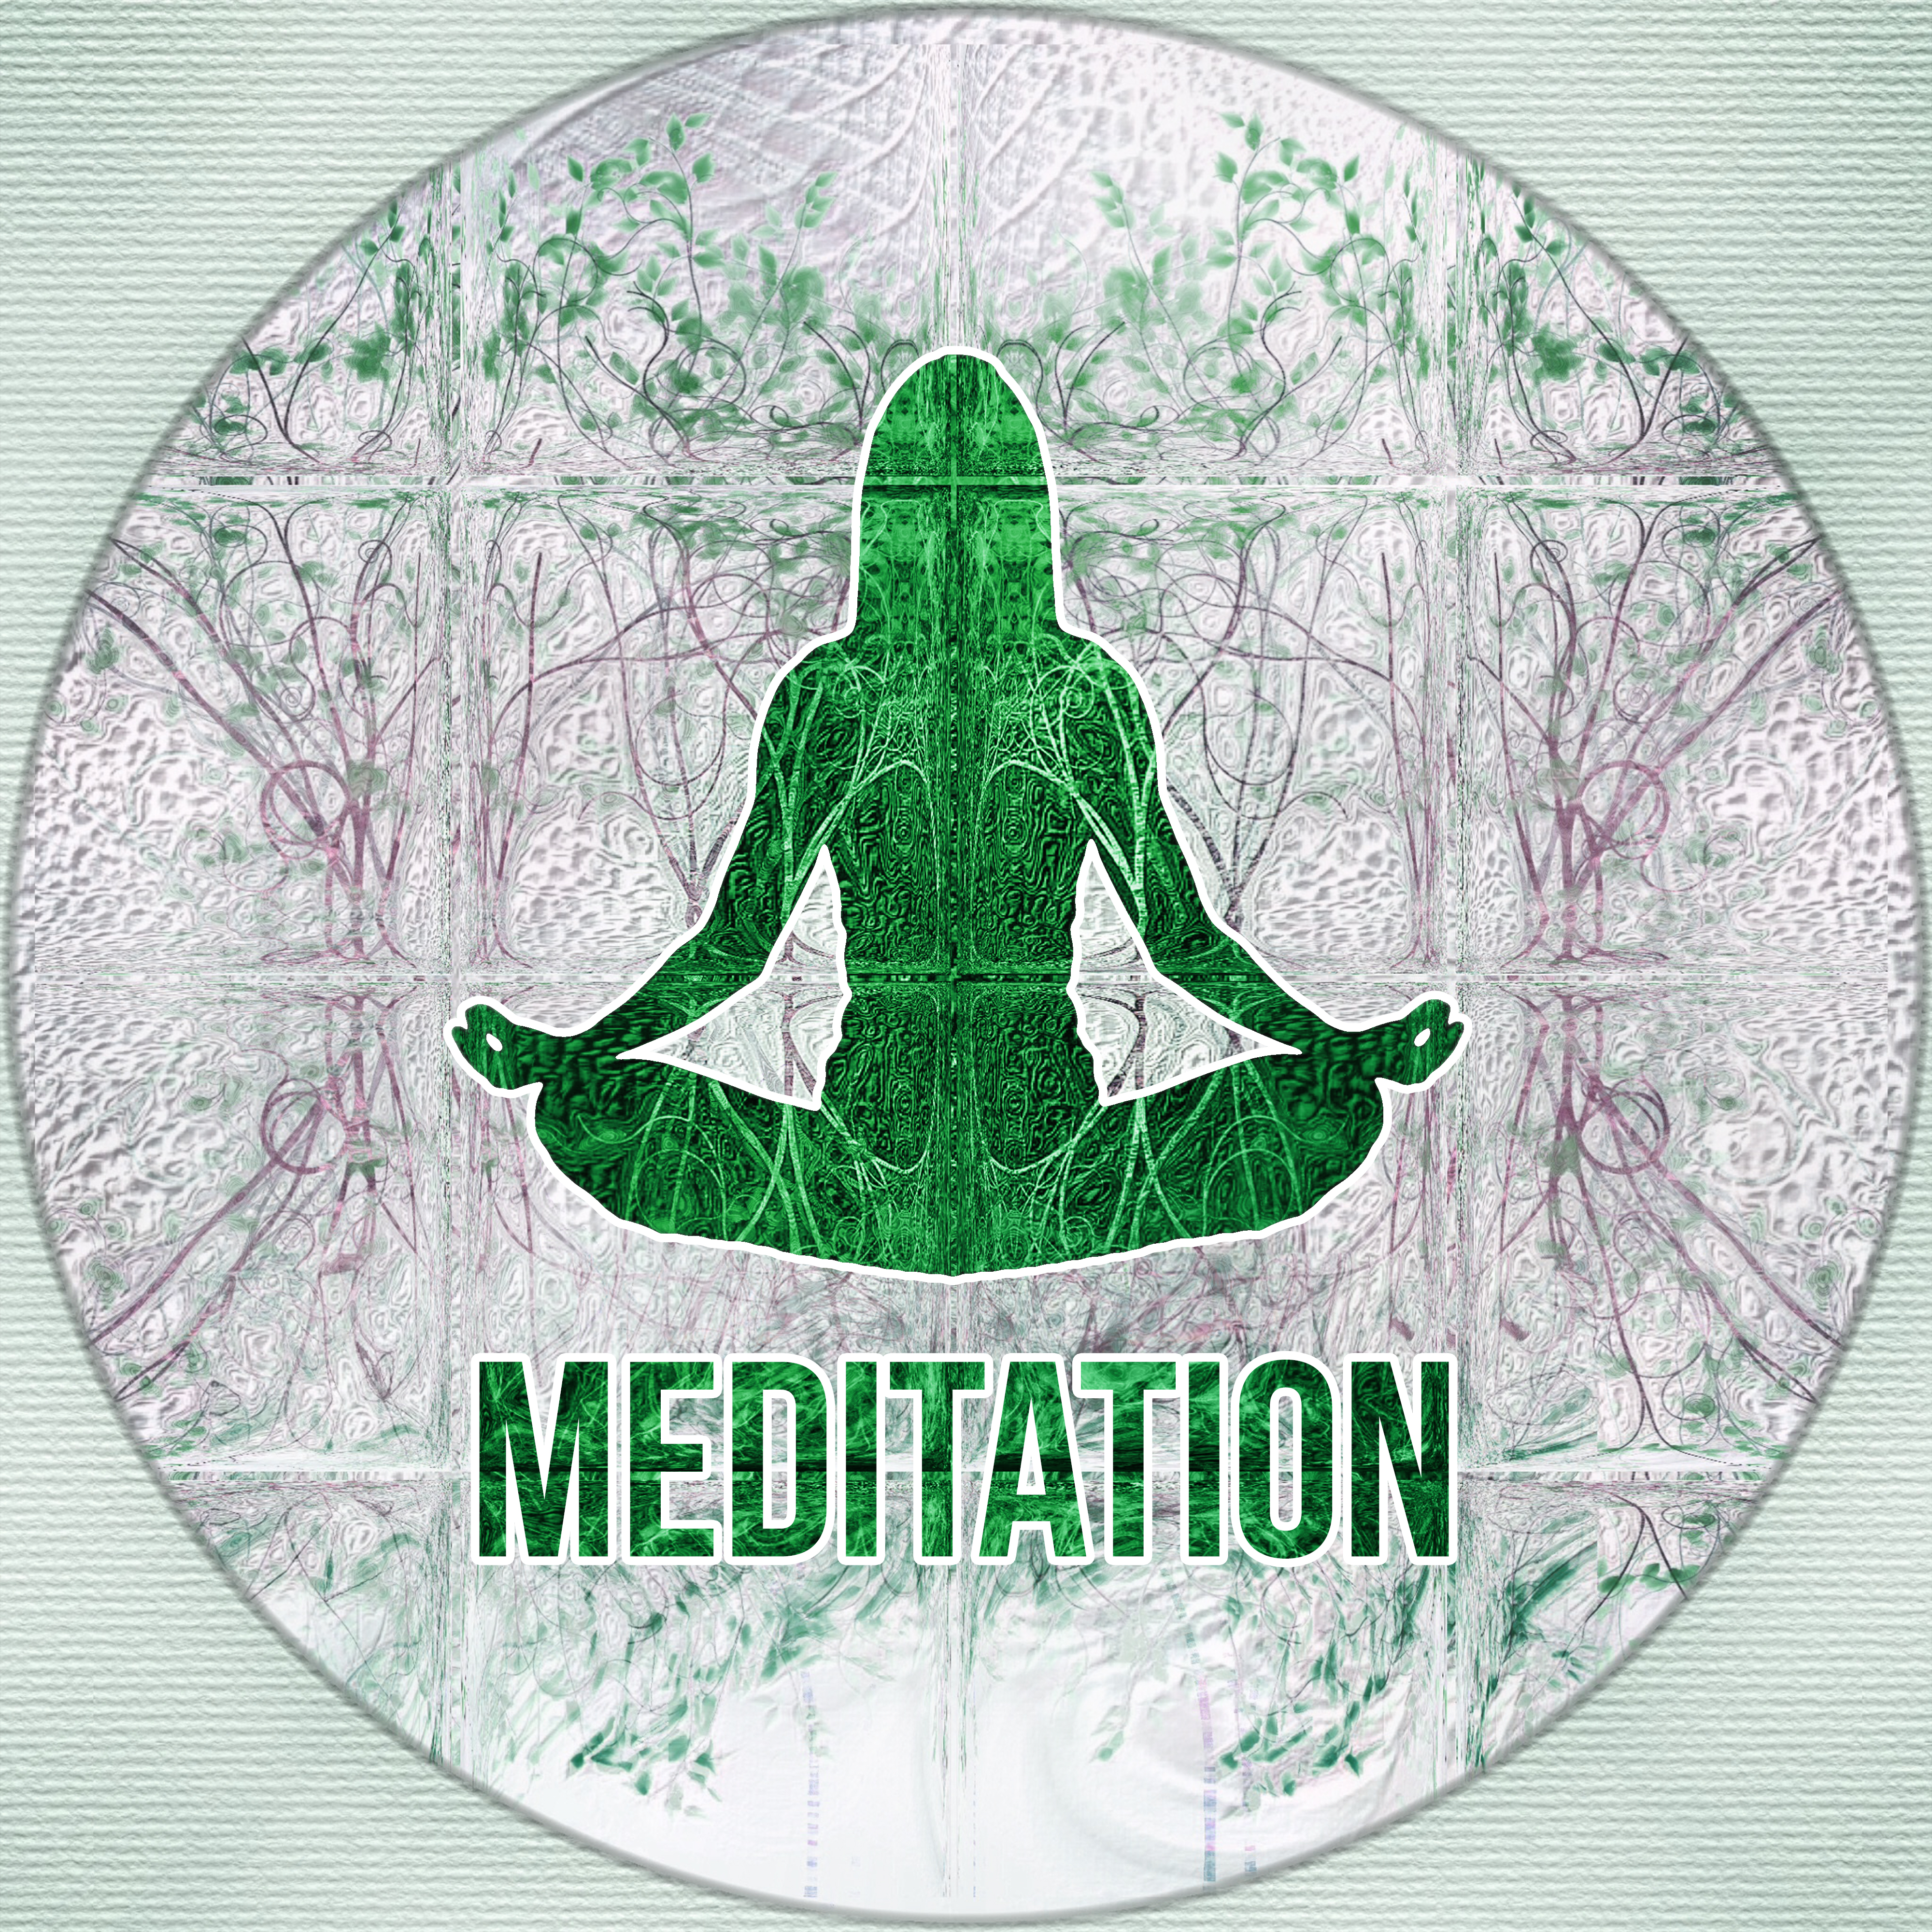 Meditation - Stress Relief, Sounds of Nature for Sleeping, Music for Relaxation, Study, Yoga, Spa, Massage, Reiki